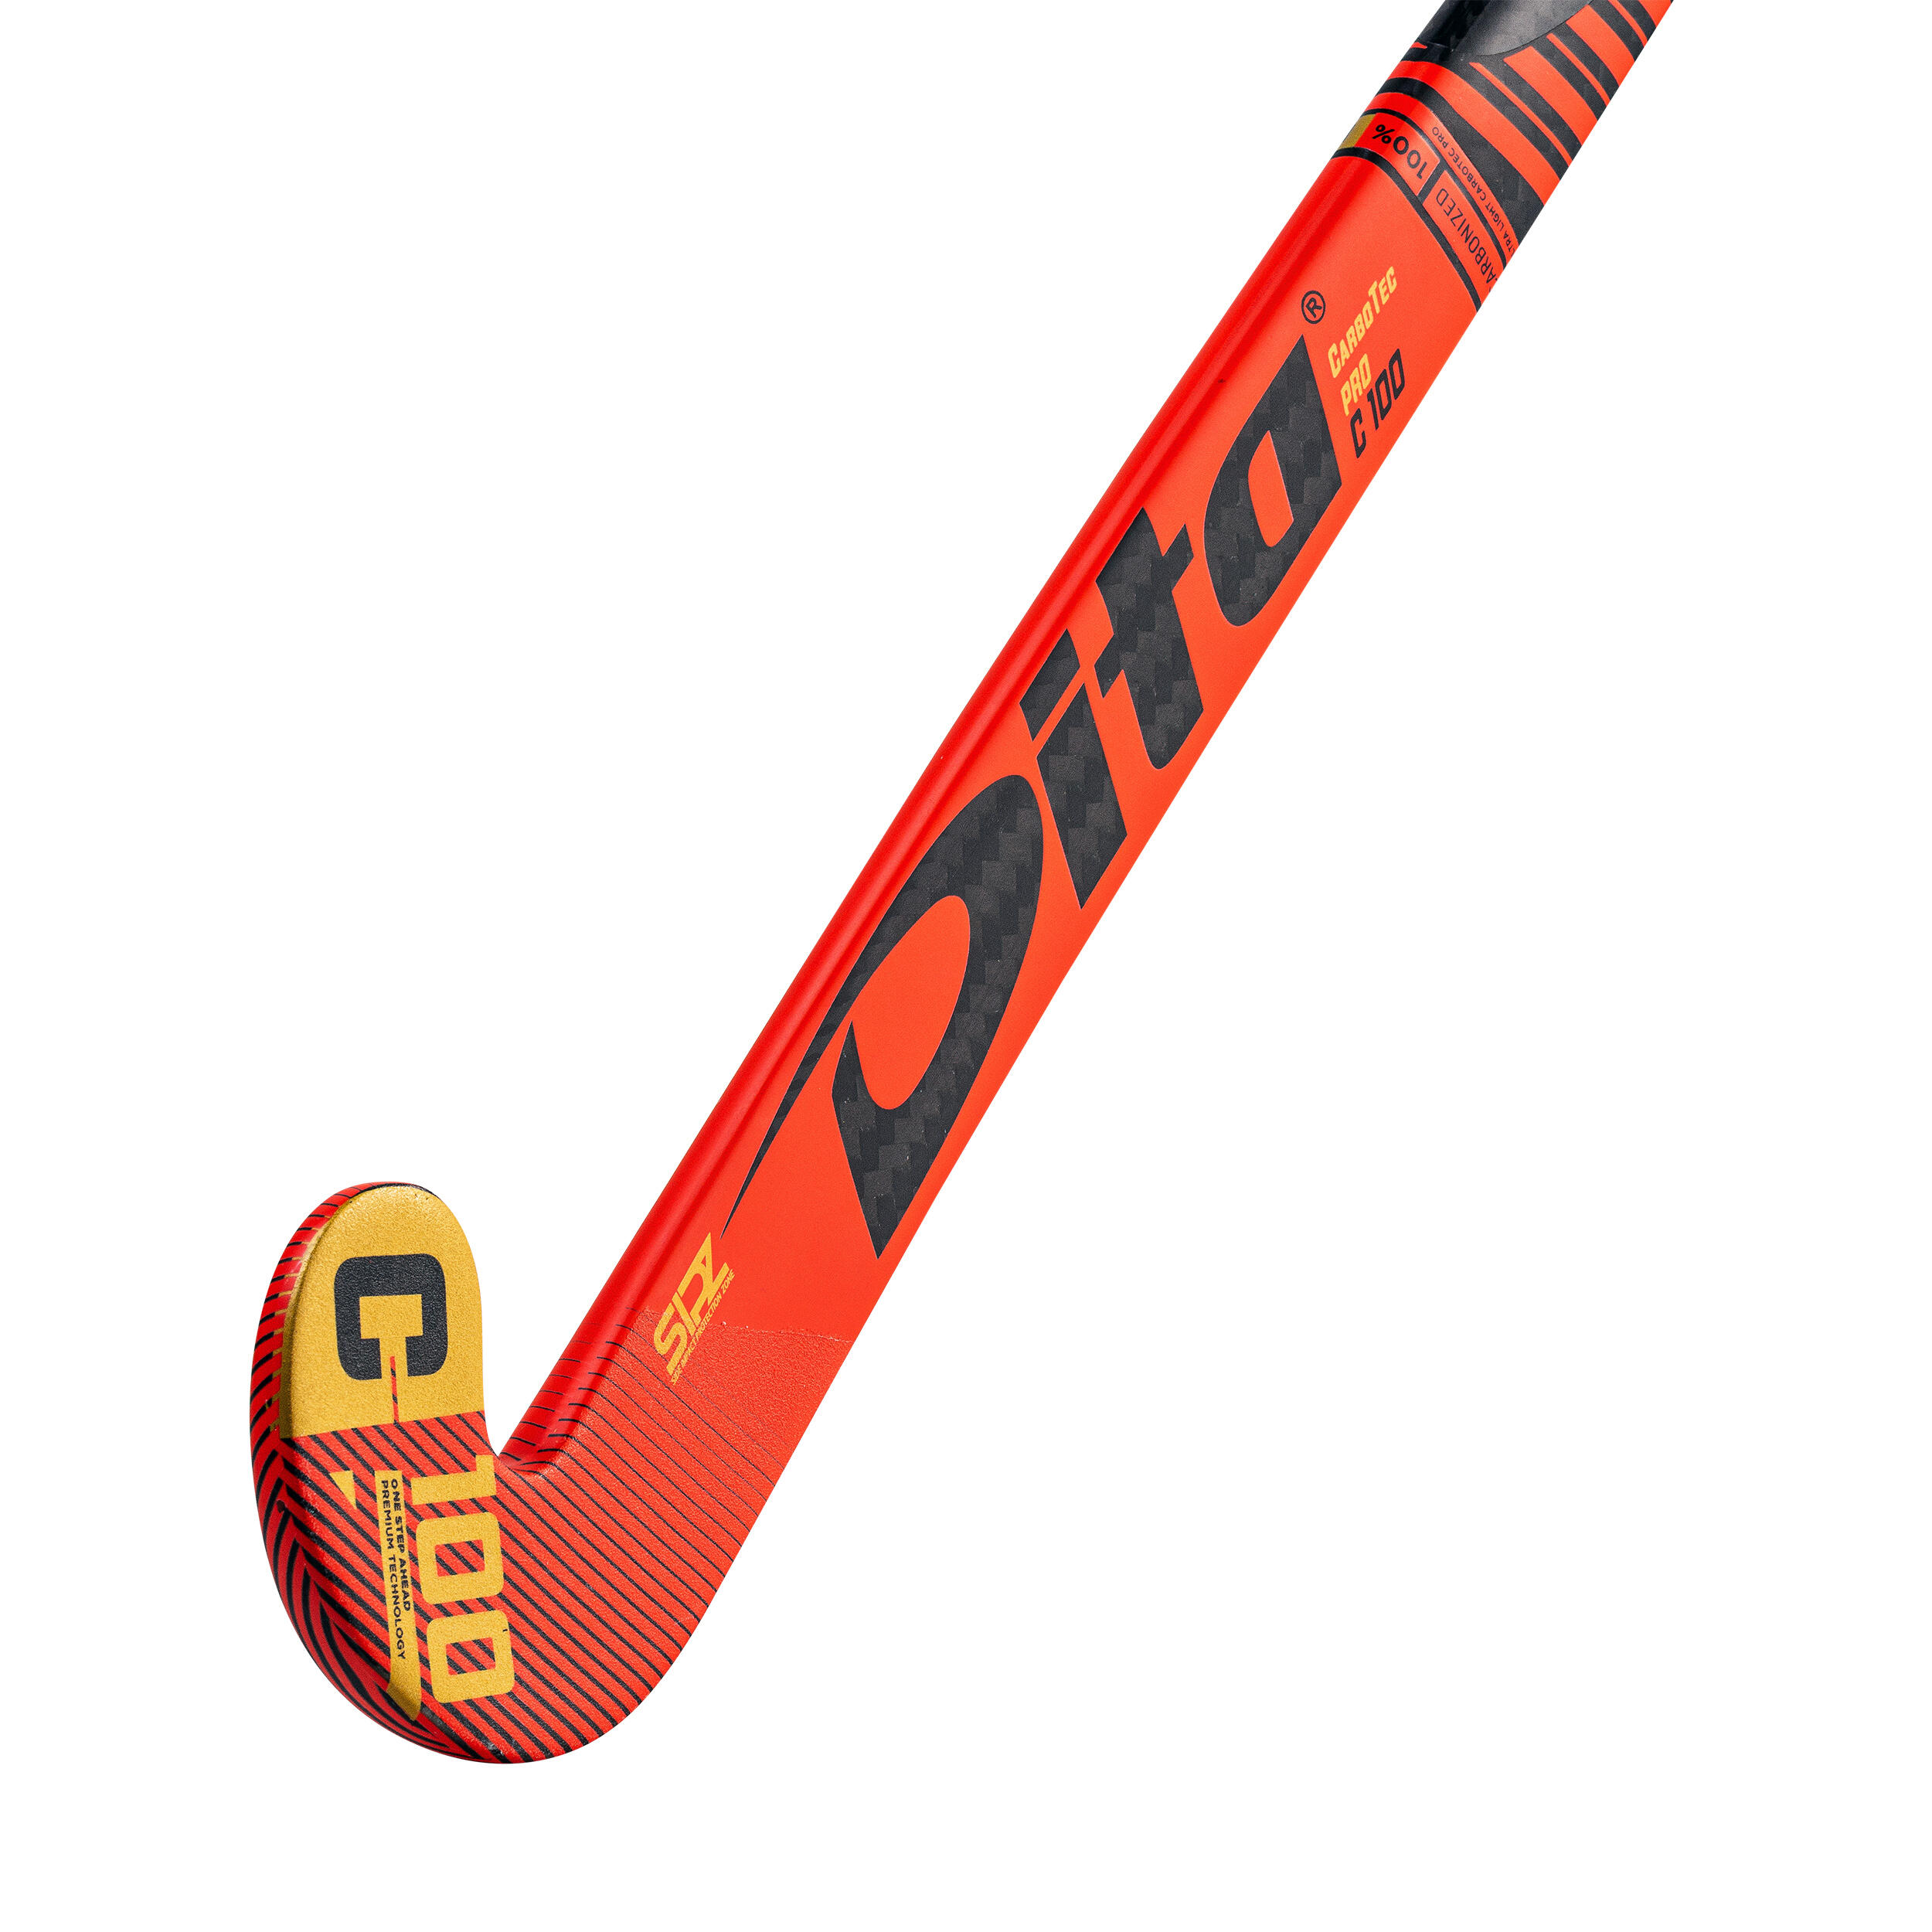 Adult Advanced 100% Carbon Low Bow Field Hockey Stick CarbotecPro C100 - Red 3/9